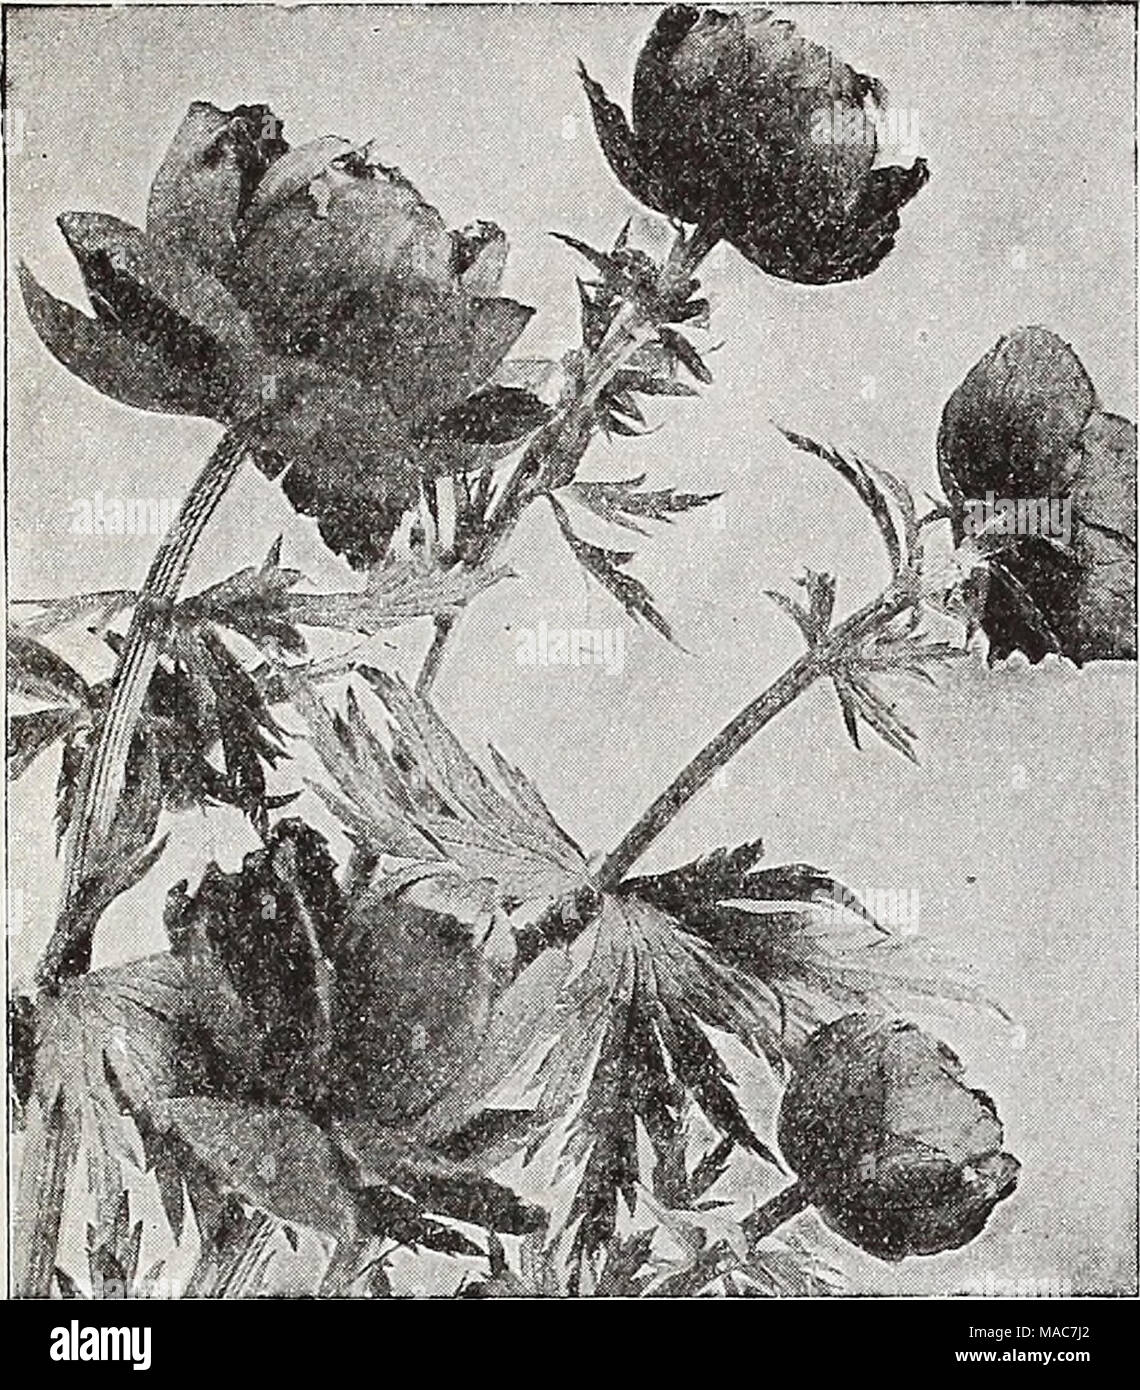 . Dreer's novelties and specialties for 1937 . Trollius—Globeflower ® Desirable free-flowering plants with large, strong-stemmed Buttercup-like blossoms ranging from pale yellow to deep orange. May and June. Europaeus superbus. 2 ft. Glorified globe-shaped Buttercups. Waxy lemon yellow. Ledebouri, Golden Queen. 2 ft. A magnificent variety with beautiful rich golden yellow blooms during July and August. Each 50c; 3 for $1.40; 12 for $5.50. Meteor. 3 ft. Very large, deep rich orange. Orange Prince. 2 ft. A vigorous variety with unusually large flowers of a rich golden orange color. Any of the ab Stock Photo